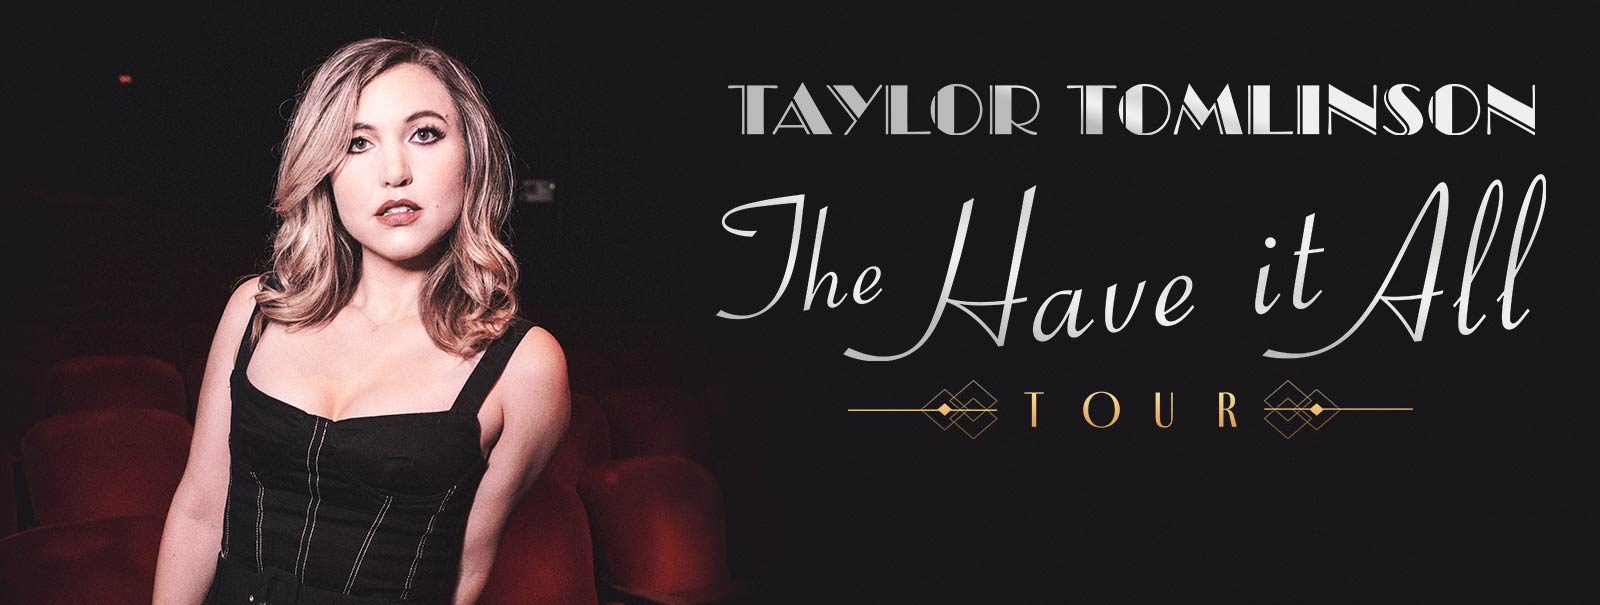 More Info - Taylor Tomlinson: The Have It All Tour